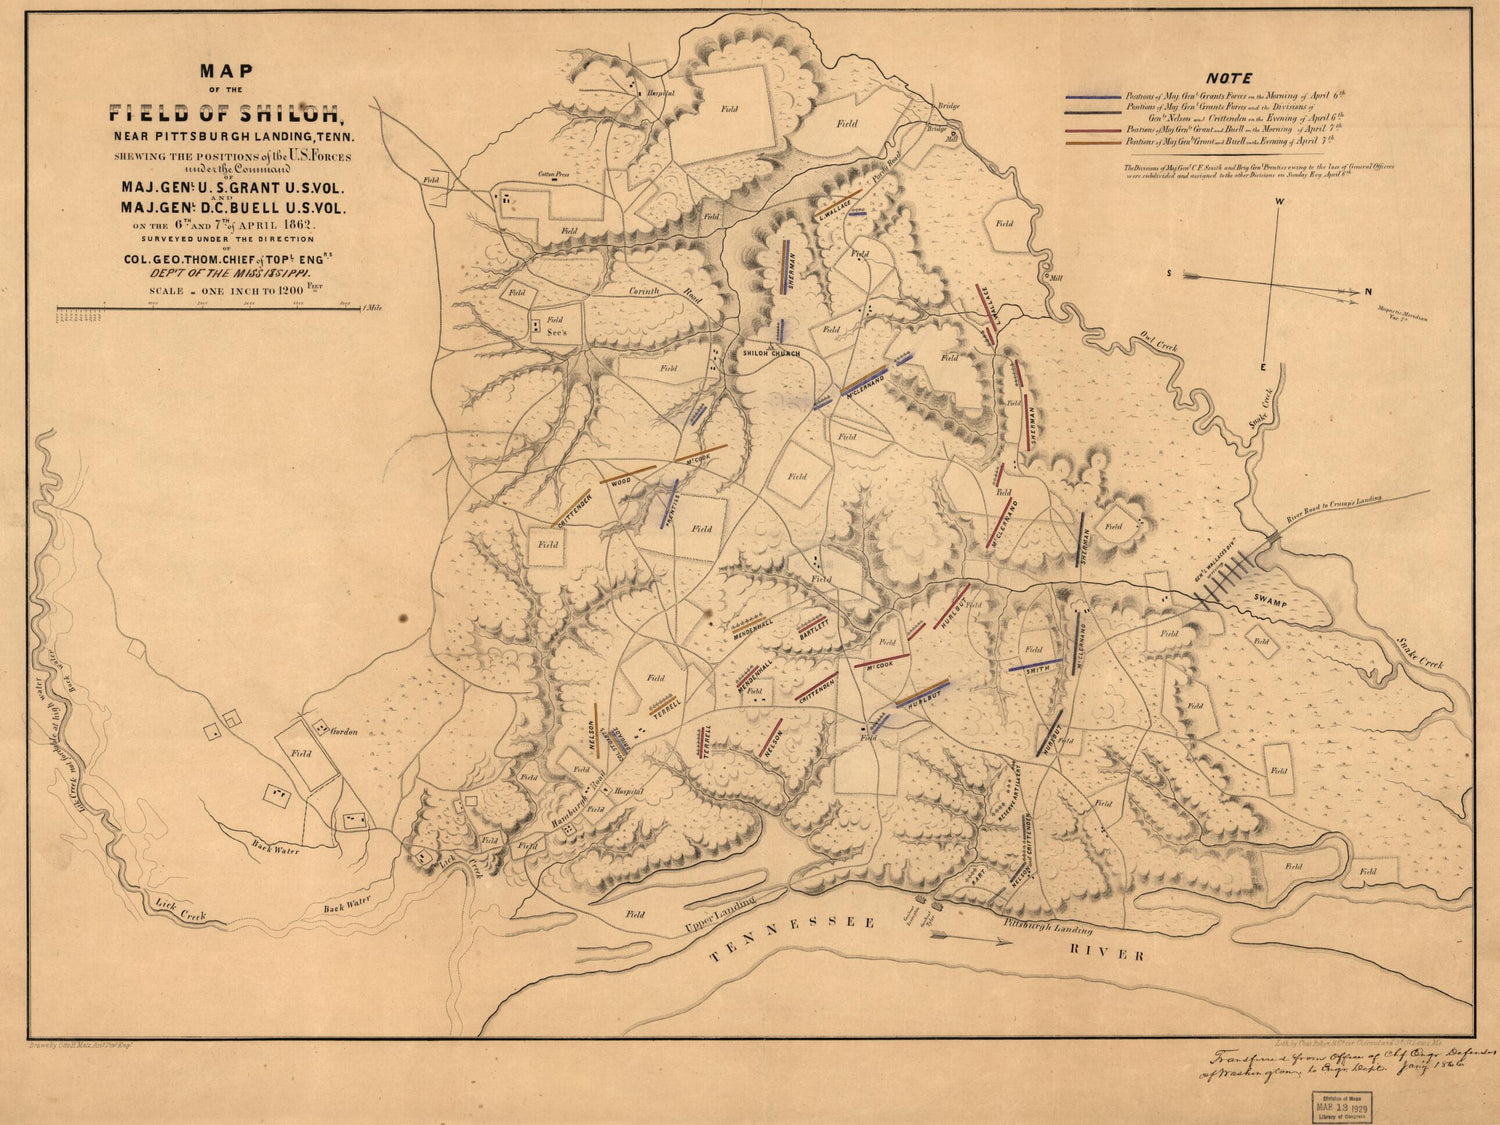 This old map of Map of the Field of Shiloh, Near Pittsburgh Landing, Tennessee, Shewing the Positions of the U.S. Forces Under the Command of Maj. Genl. U. S. Grant, U.S. Vol. and Maj. Genl. D. C. Buell, U.S. Vol. On the 6th and 7th of April from 1862 wa